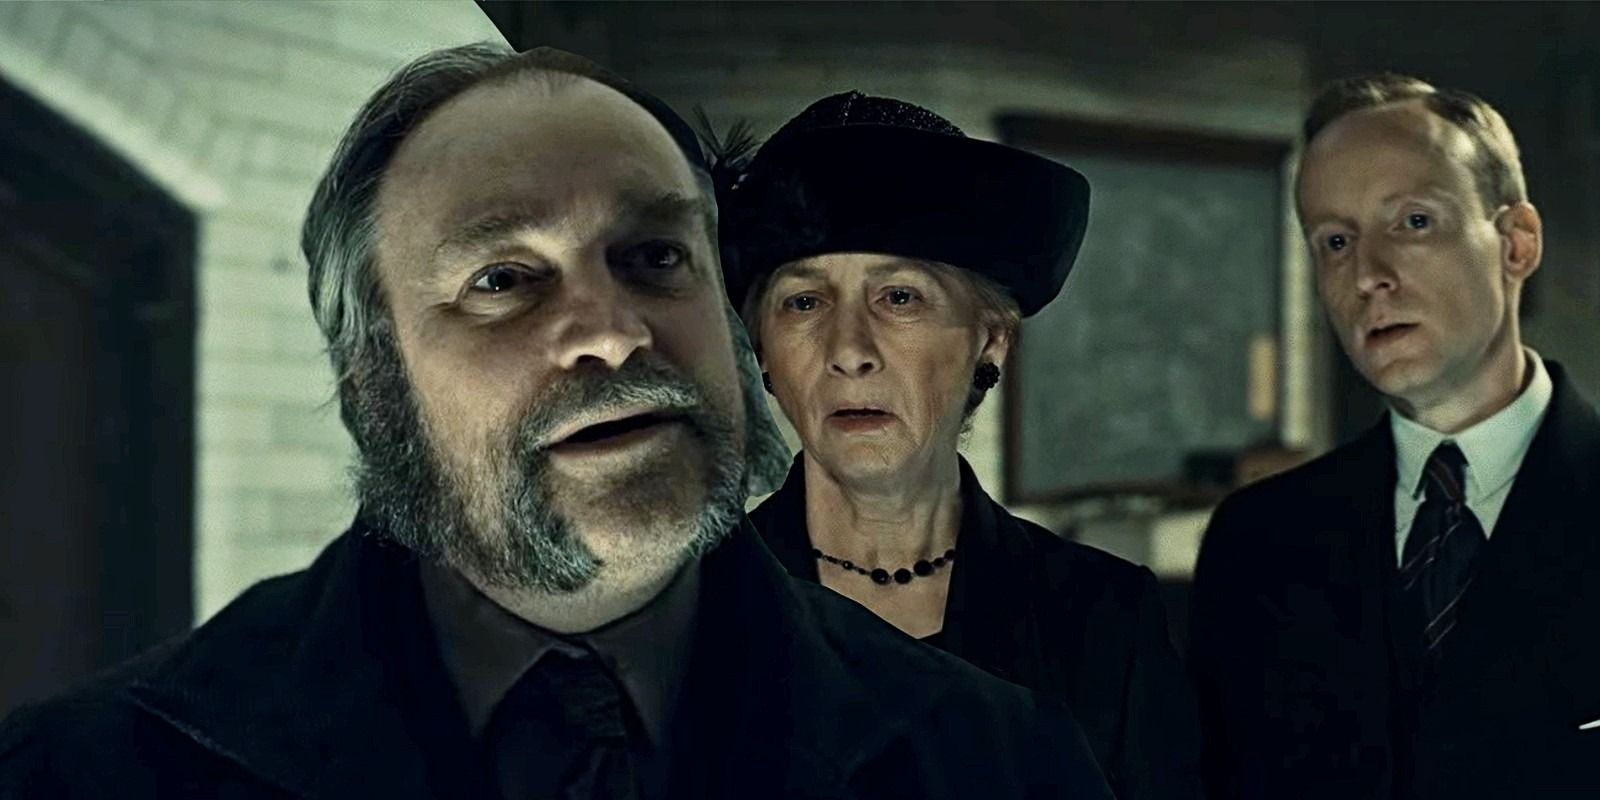 David Hewlett as Masson, Brigitte Robinson as the widow, and Cory Bertrand as the widow's son in Guillermo del Toro's Cabinet of Curiosity Graveyard Rats